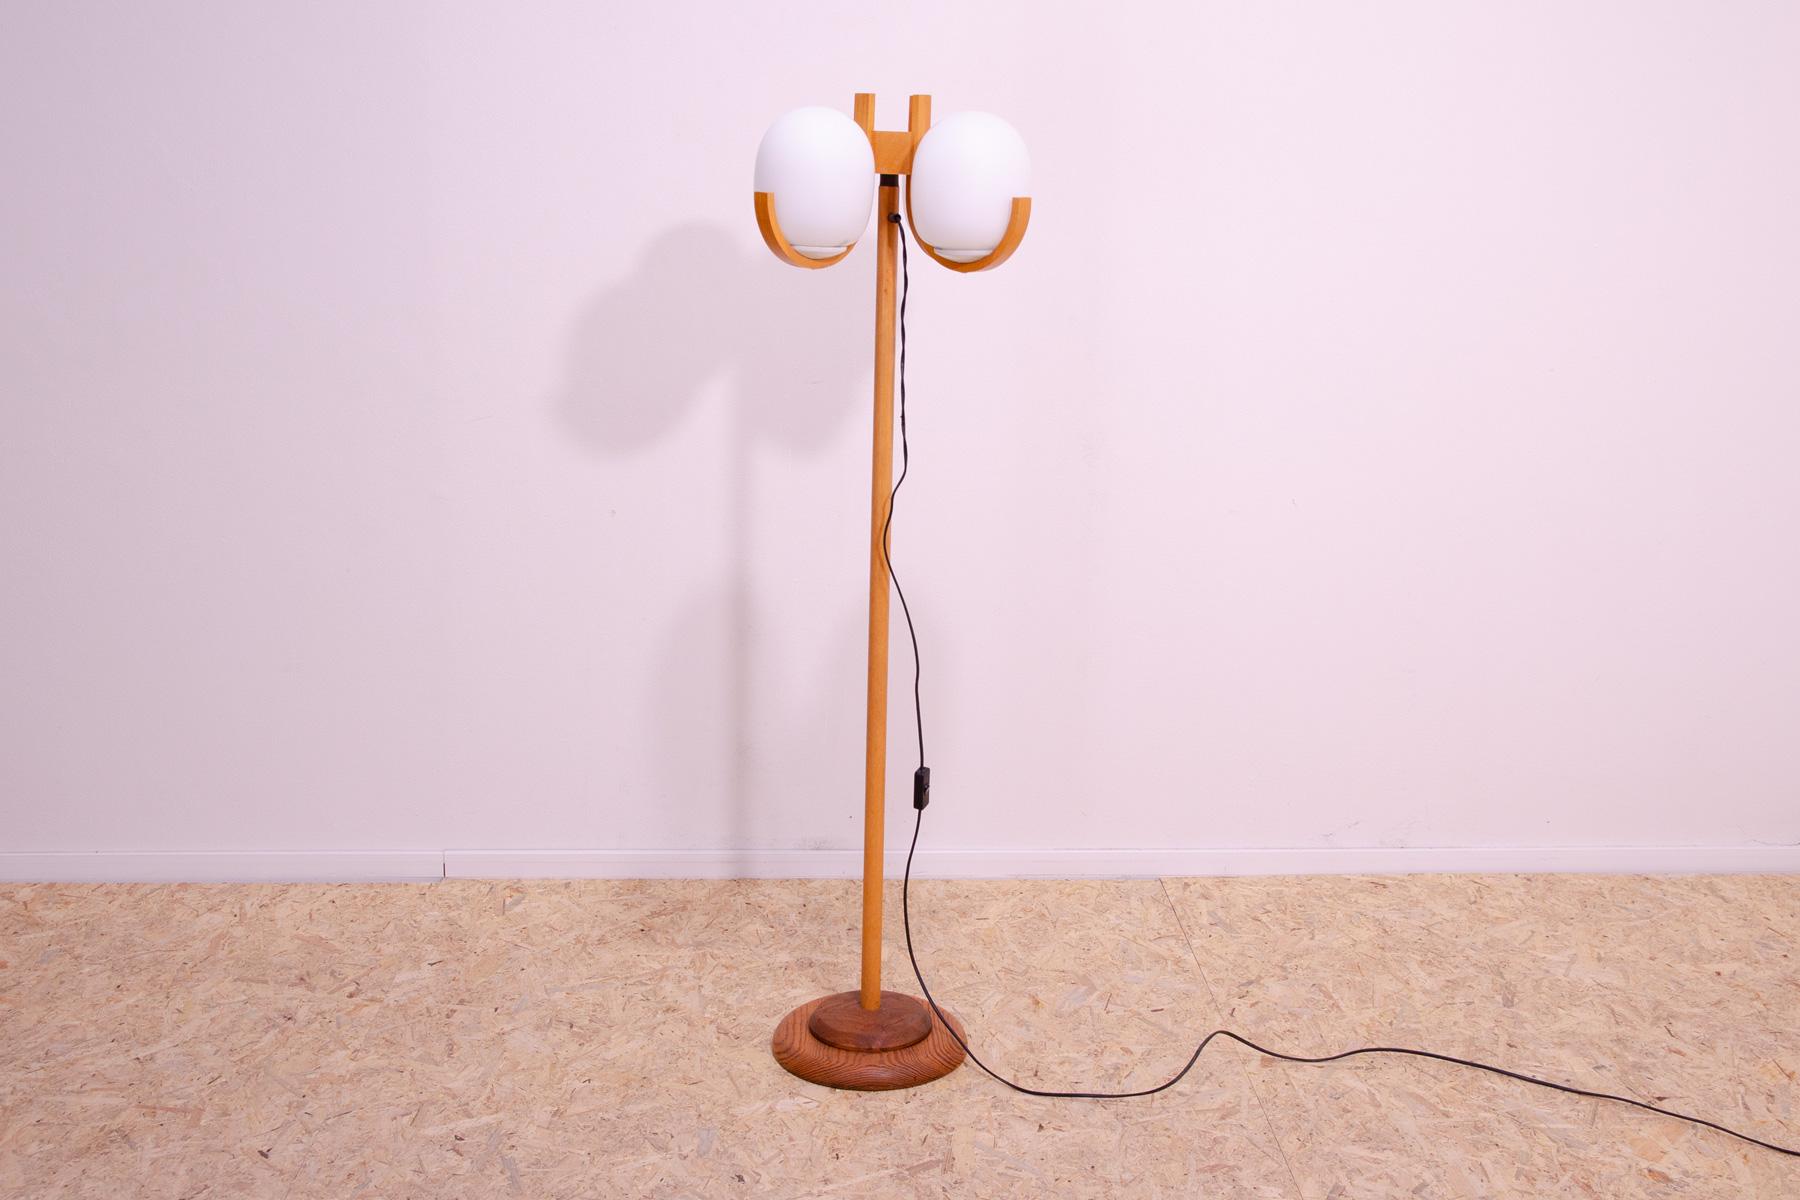 A relatively rarely seen floor lamp made in the 70s of the last century in the former Czechoslovakia. It was most likely part of a hotel room equipment.

The lamp is made of white opaque glass with a matte surface and an all-wood frame made of beech